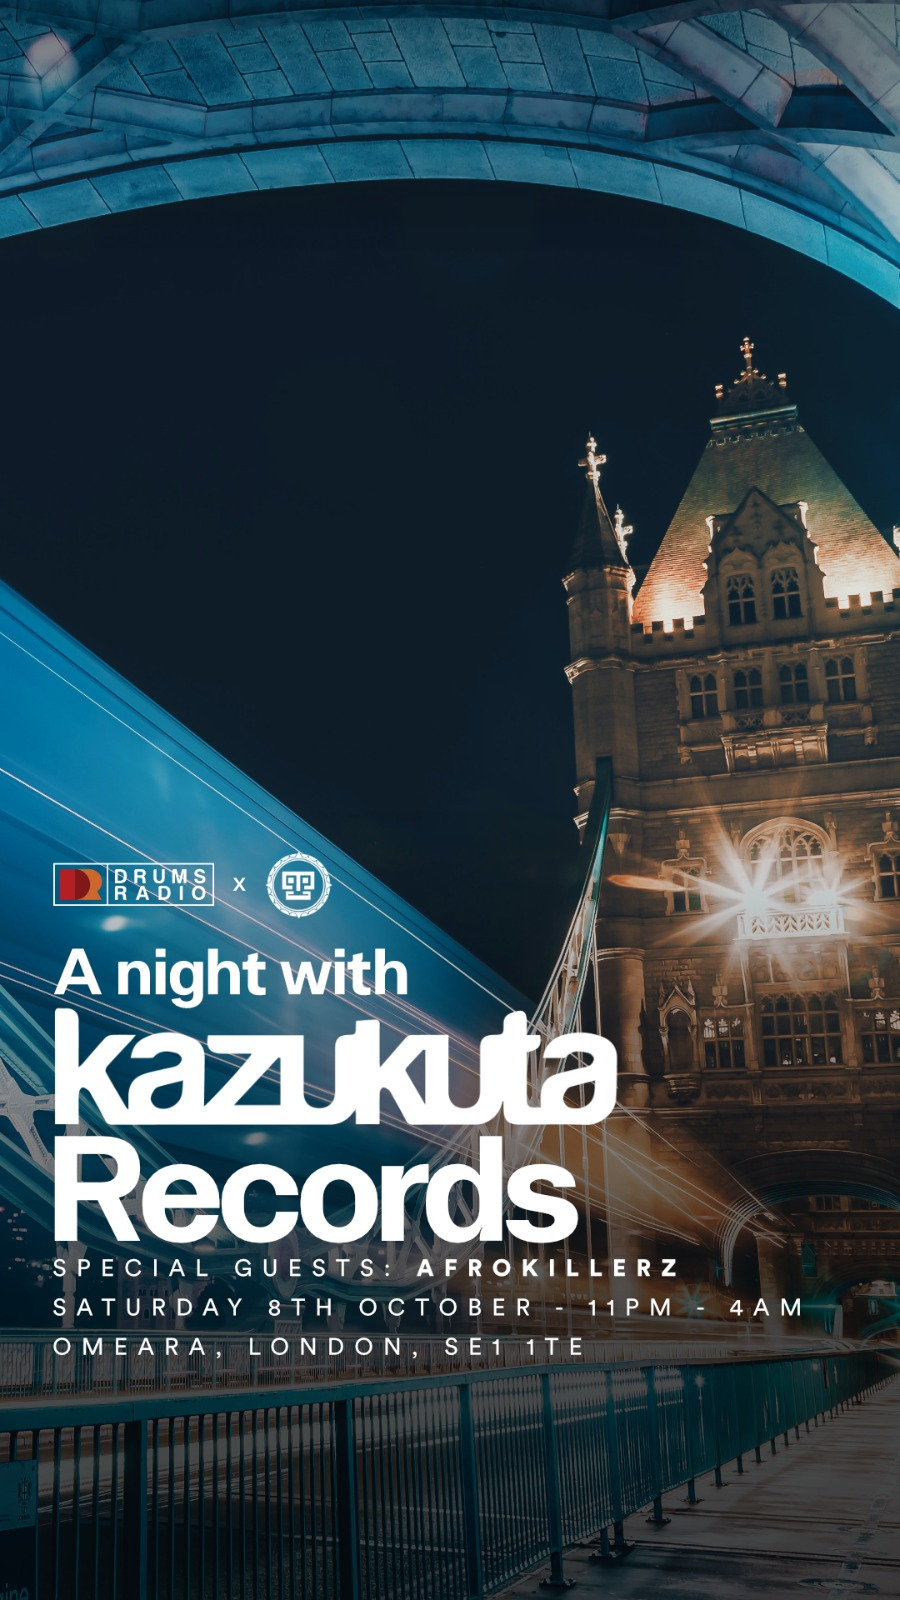 Drums Radio presents: A Night with Kazukuta Records - Flyer front